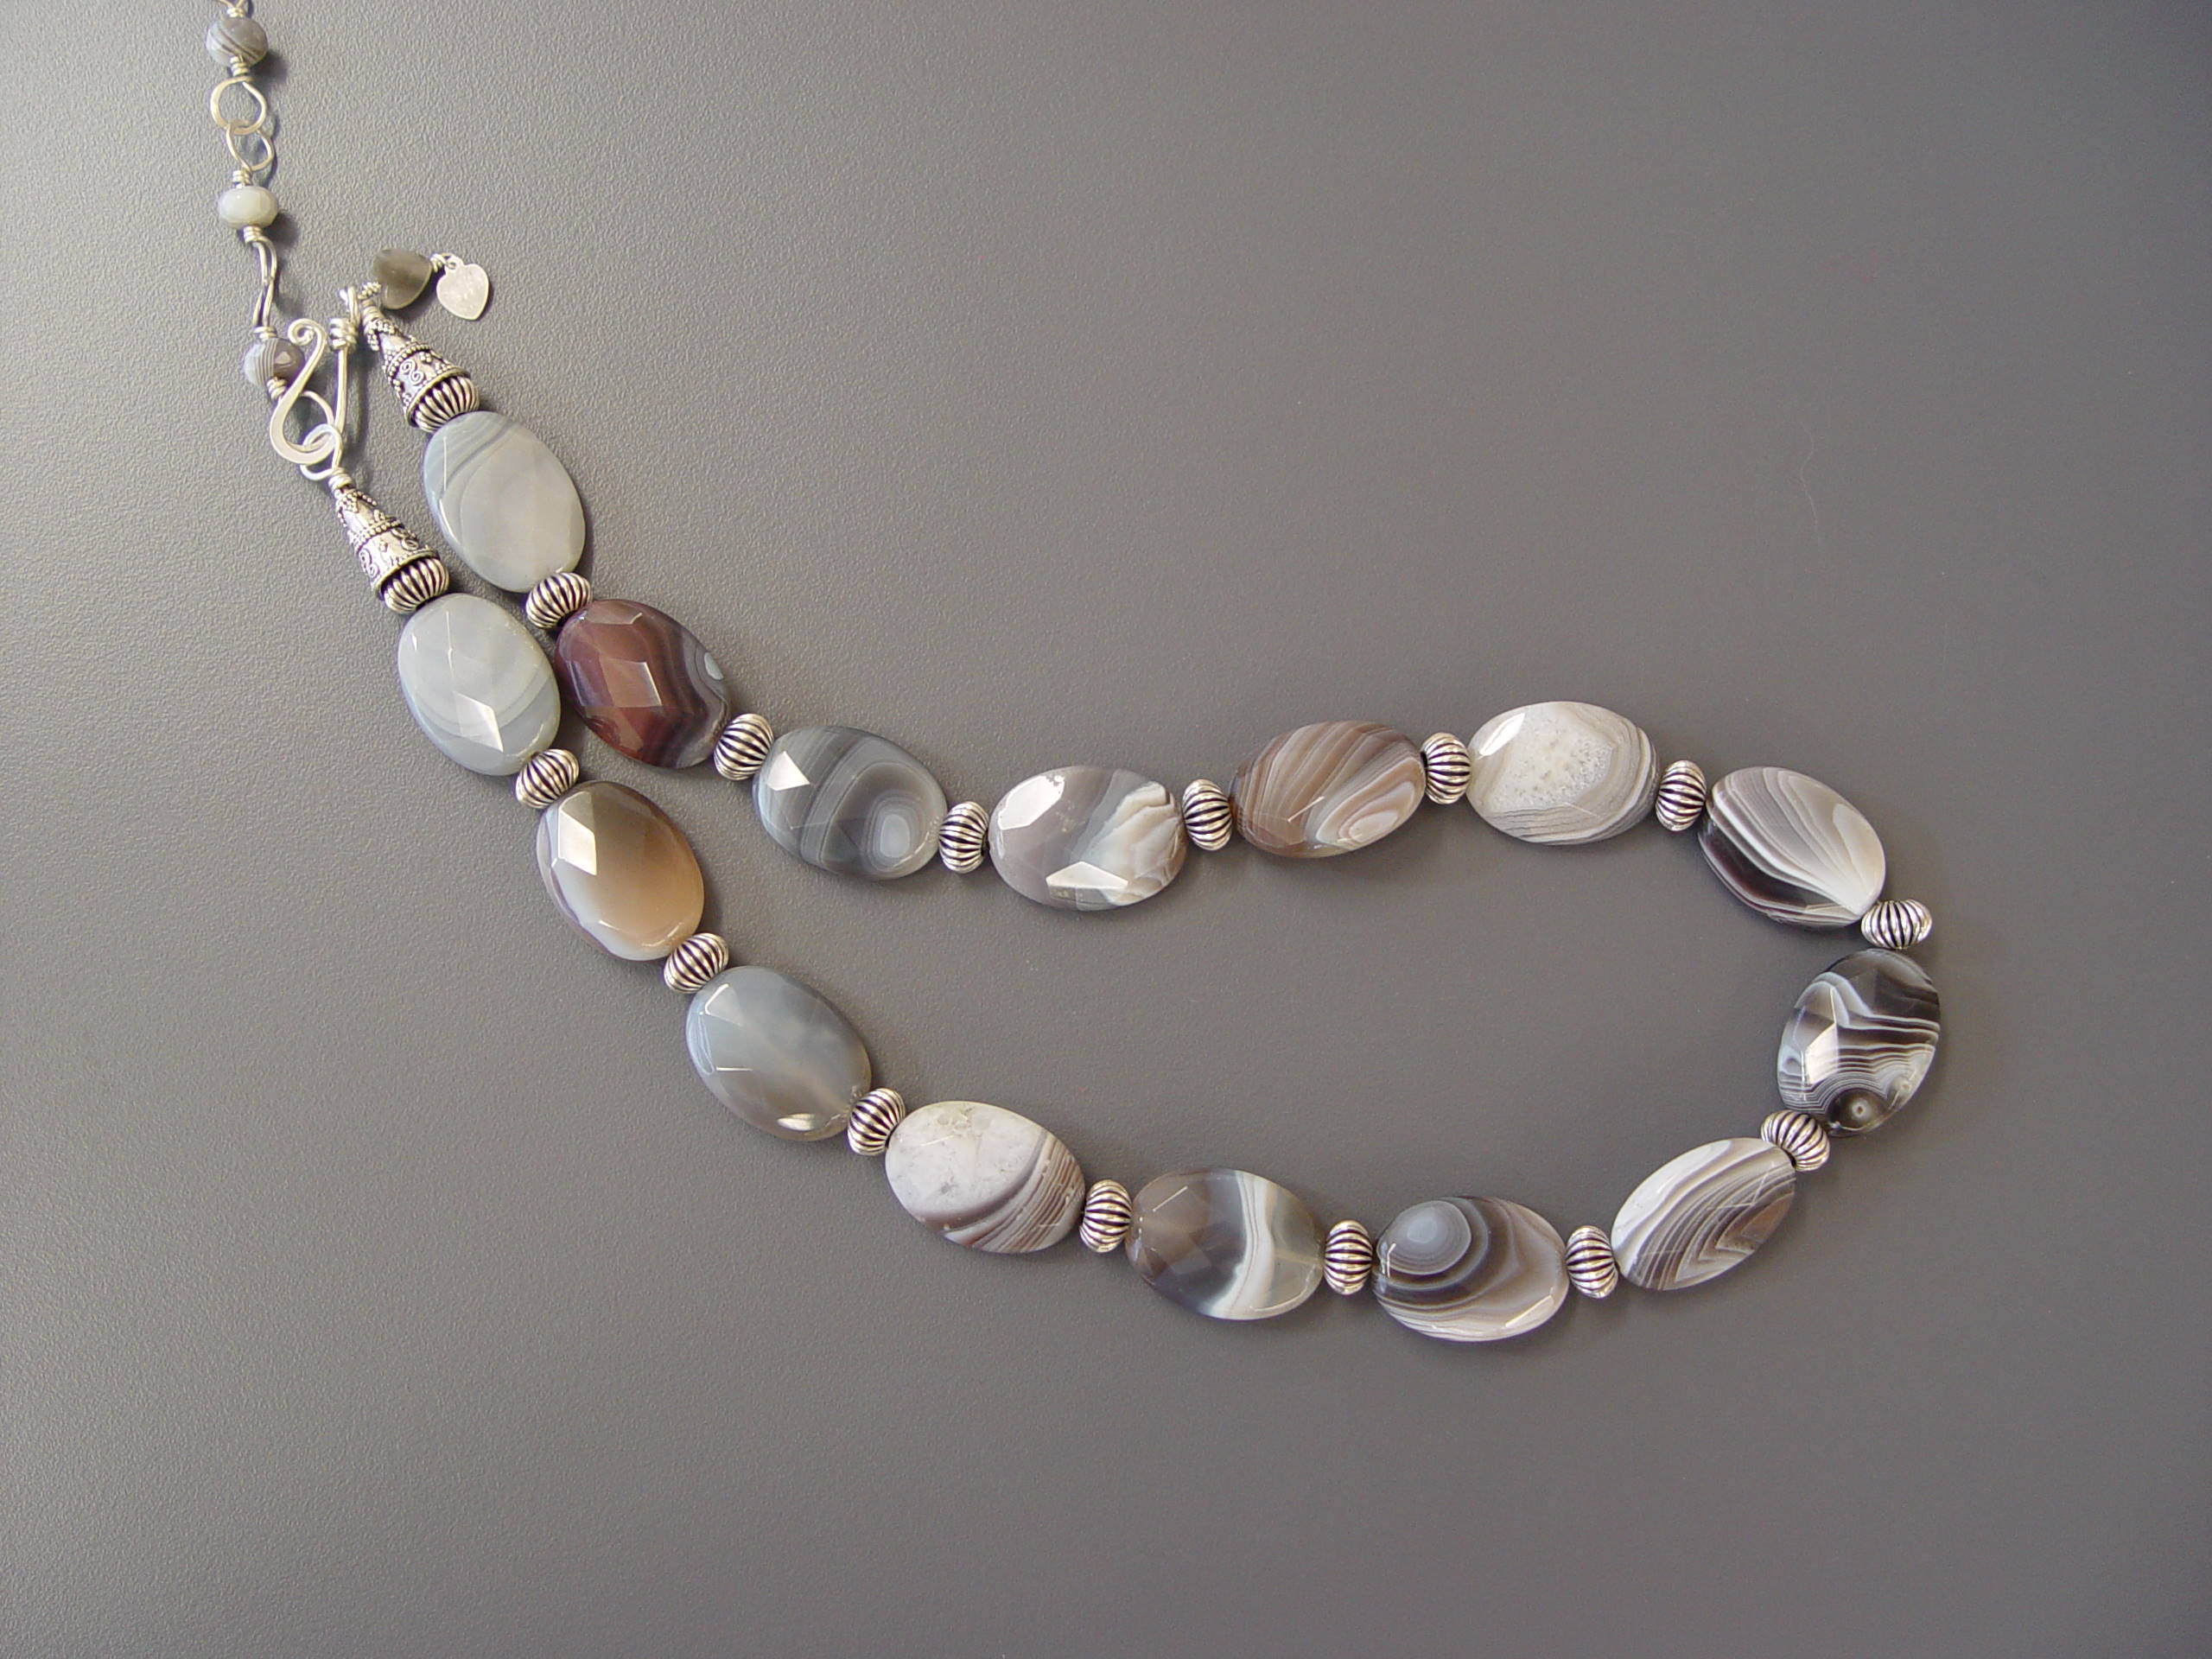 Detail of Botswana Agate Necklace